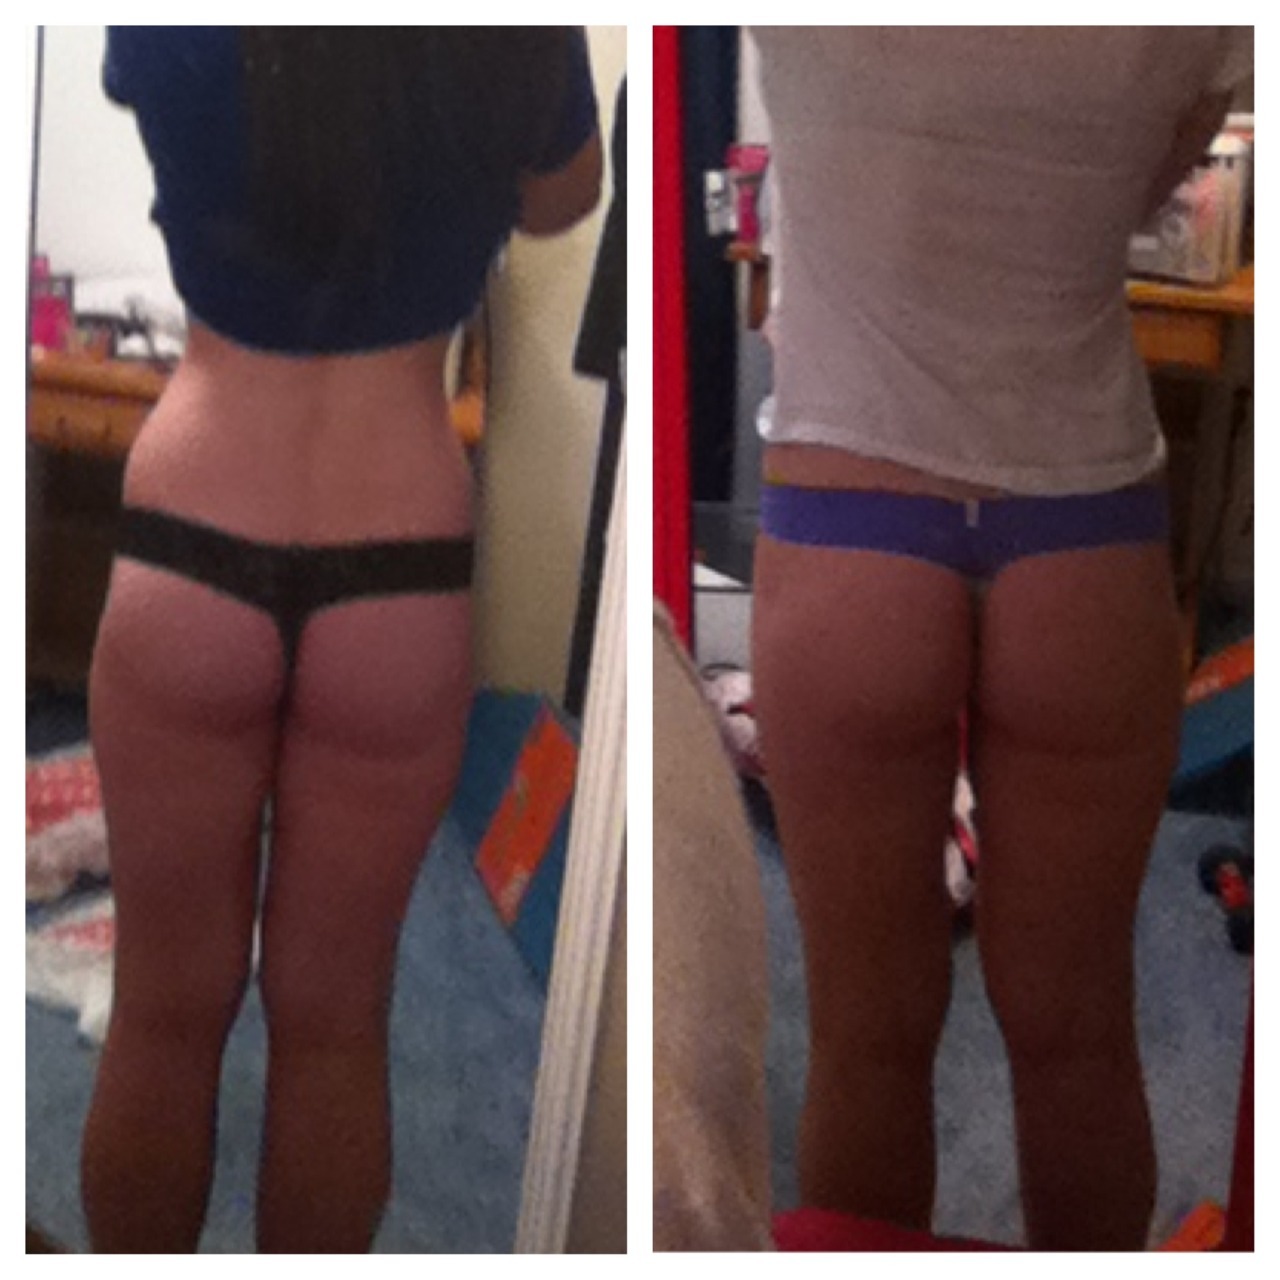 fit-and-skinny-kate:  This is about 2 months I’d say, not much of a difference